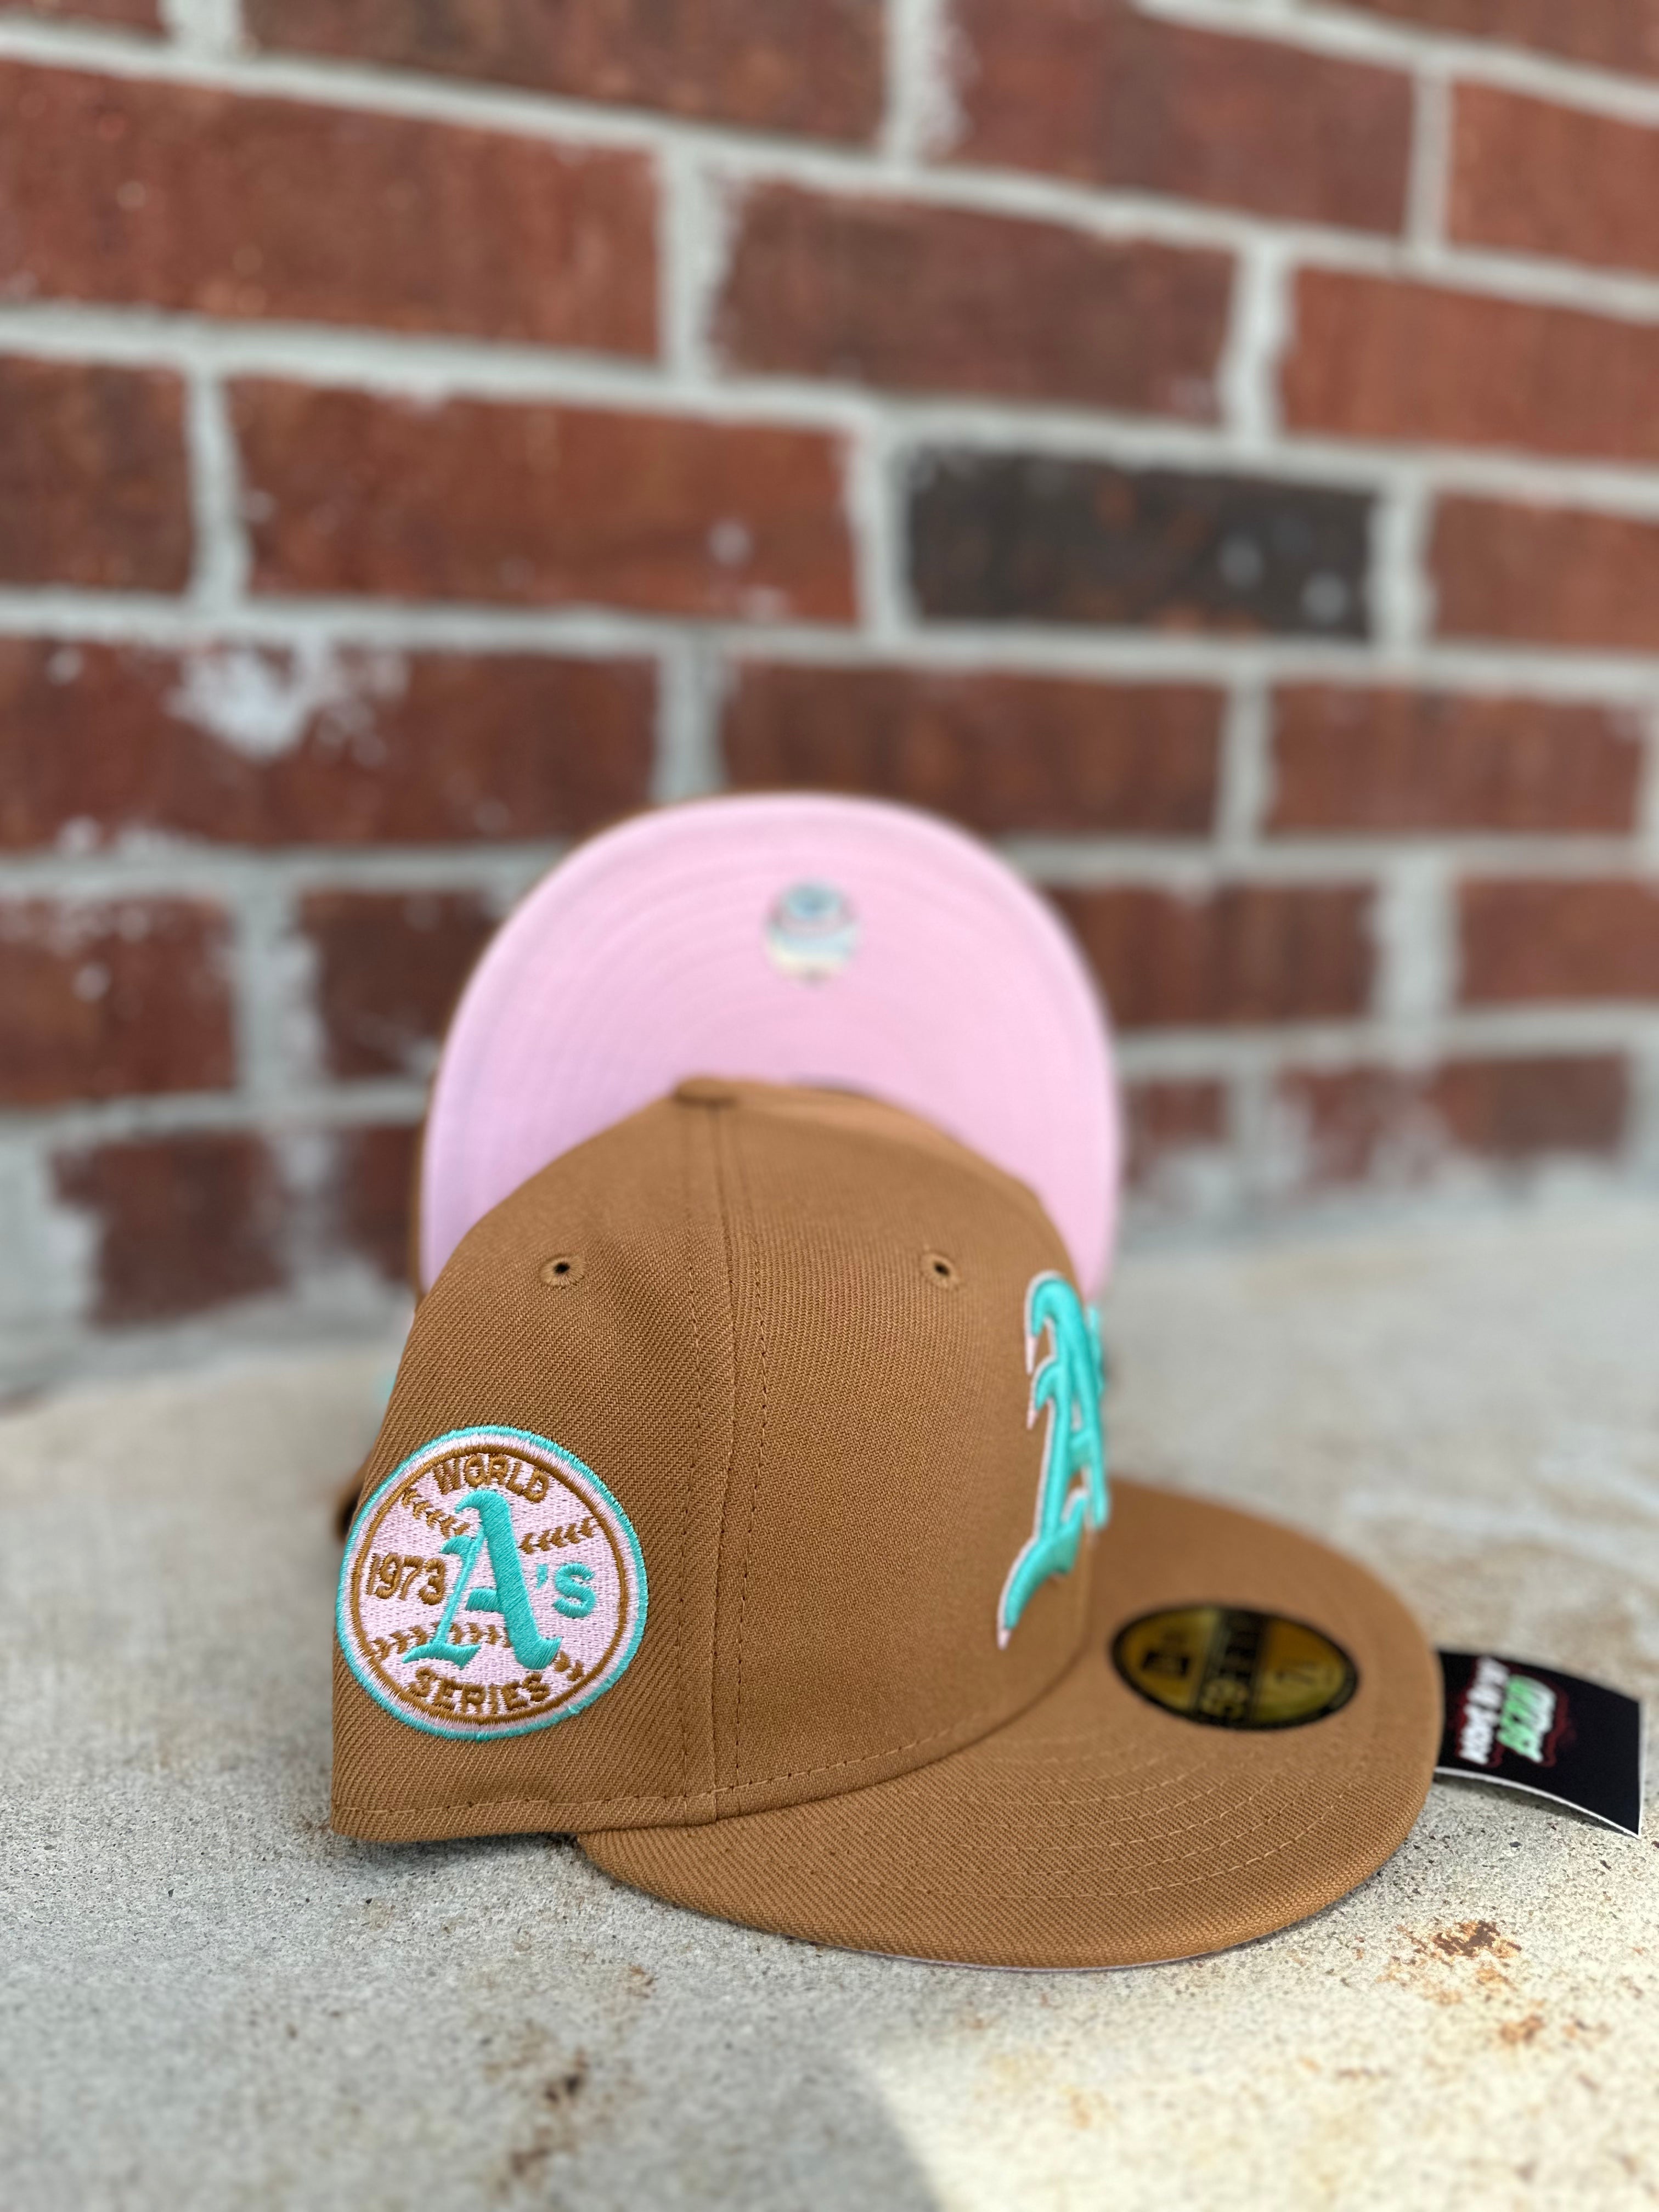 New Era 59 FIFTY Fitted "Oakland Athletics" Brown/Teal 1973 World Series